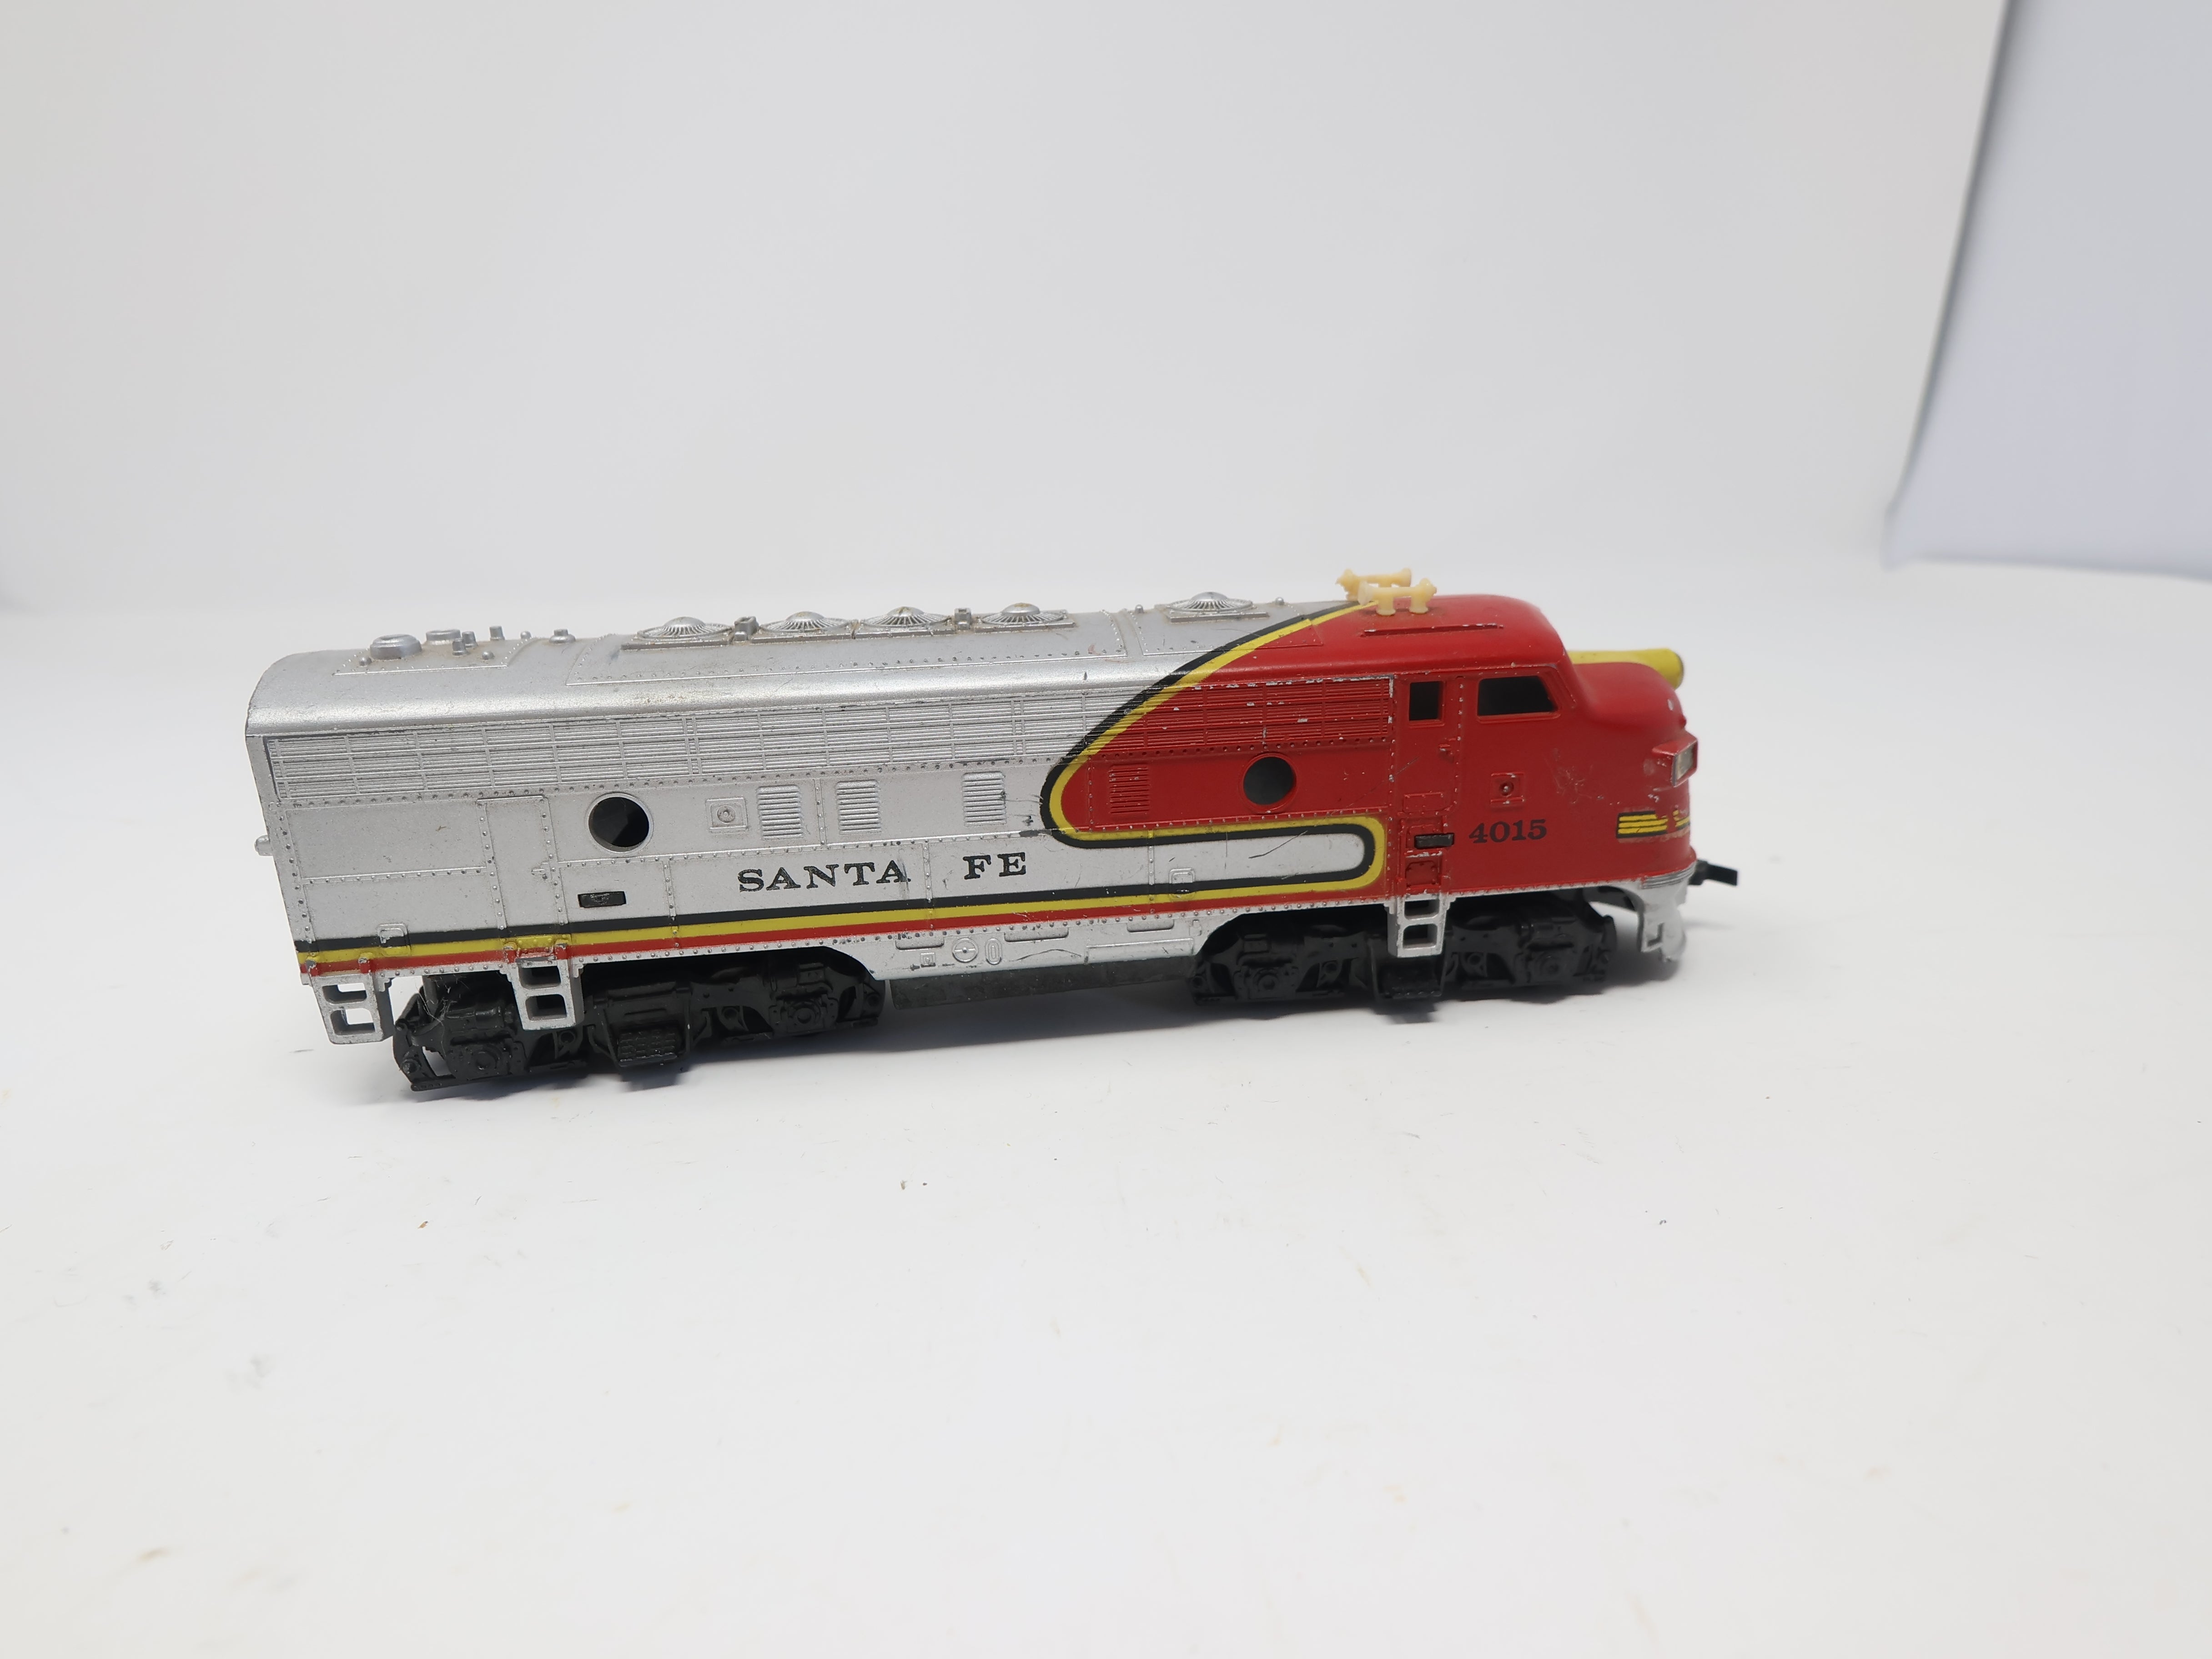 USED Tyco HO Scale, F7A Diesel Locomotive, Santa Fe #4015, Non-Powered